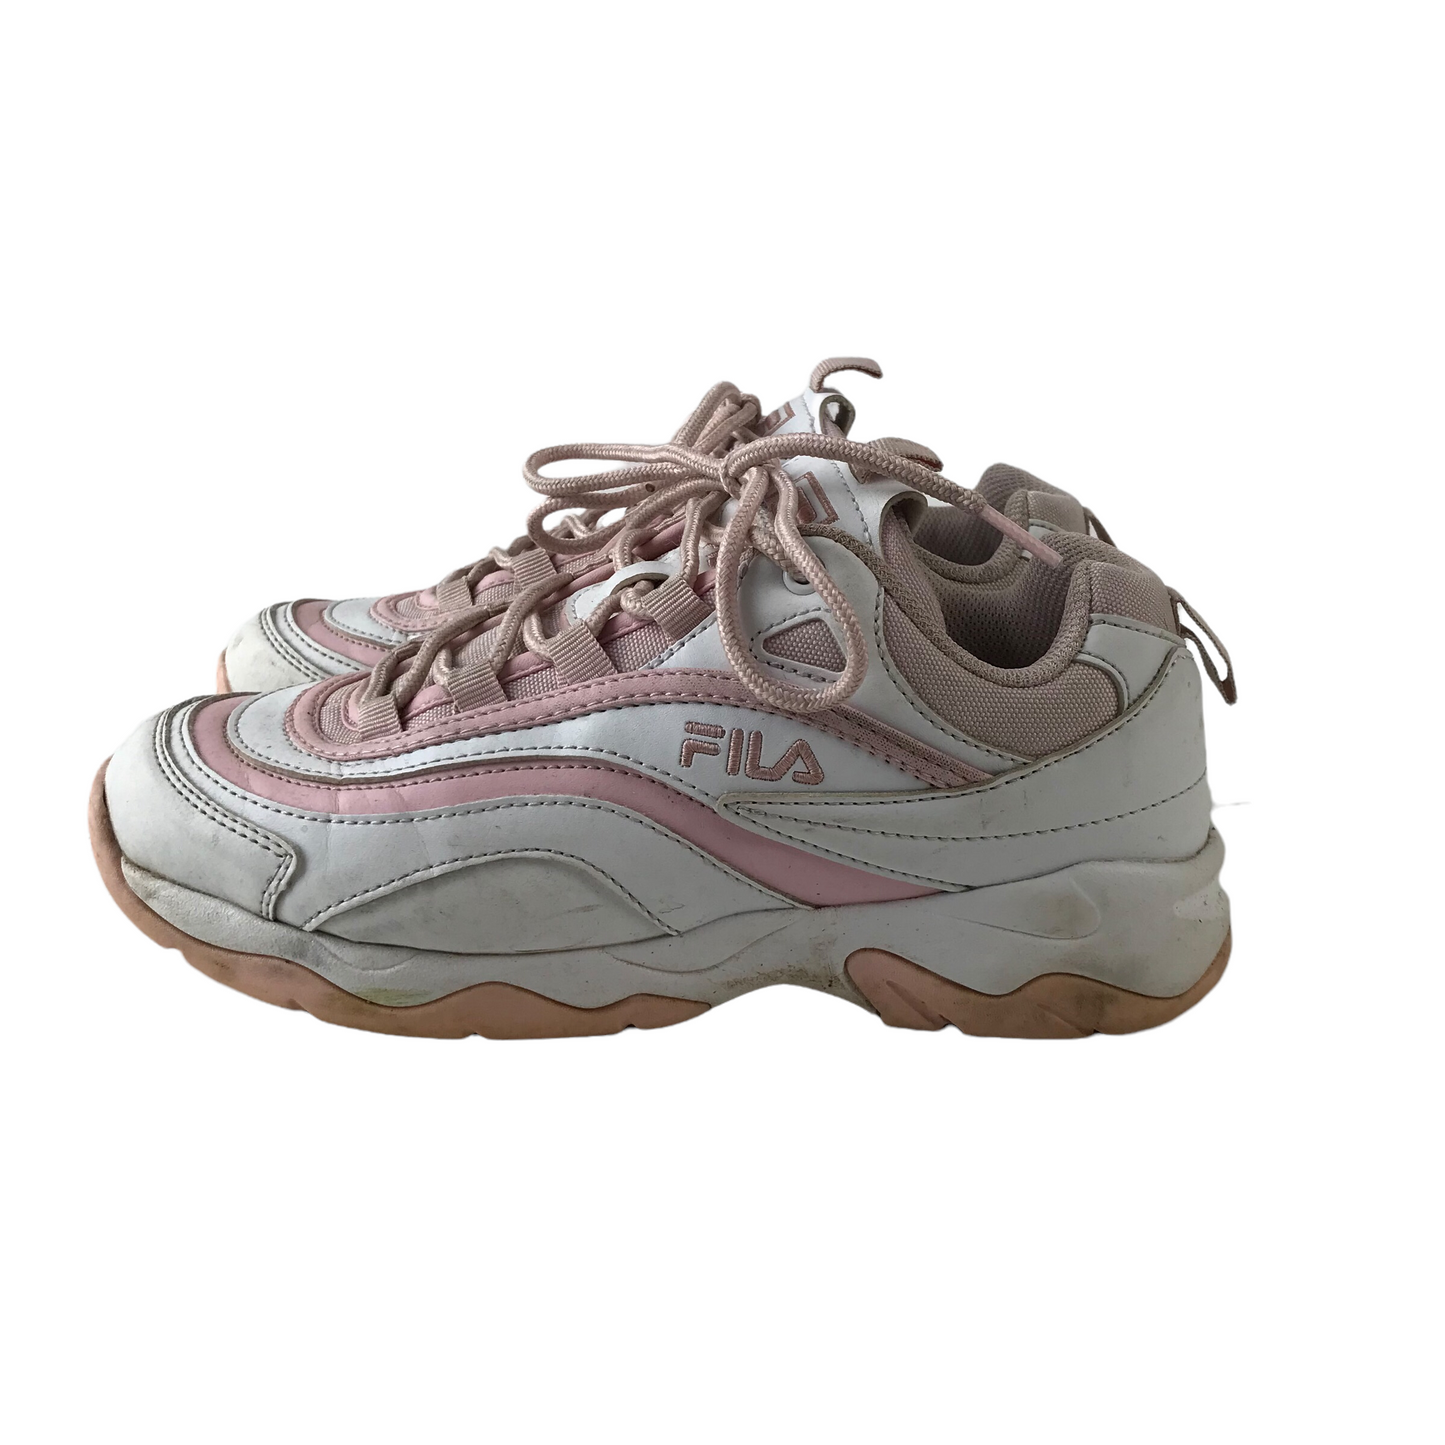 Fila White and Light Pink Trainers Size UK 5